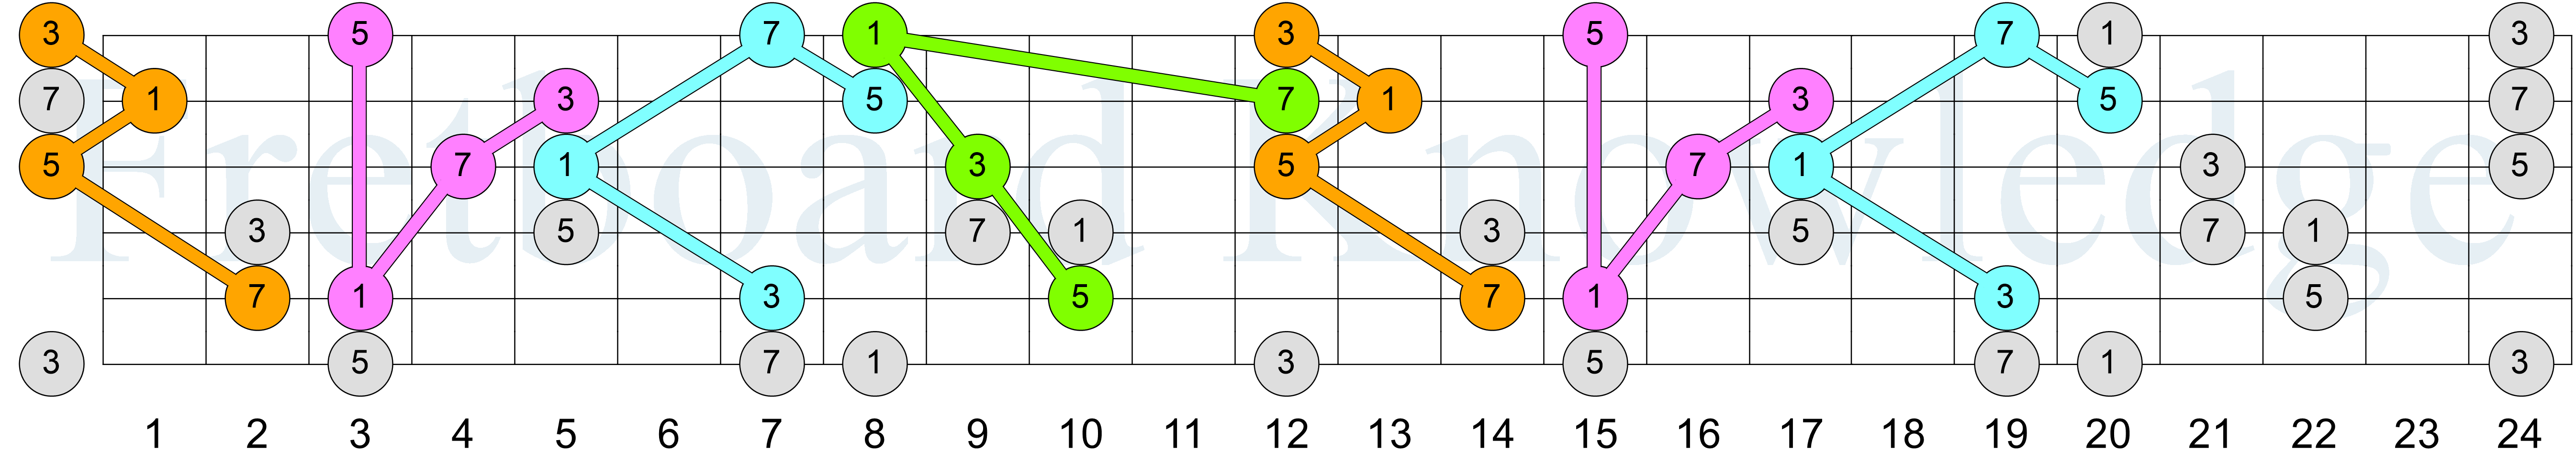 Cmaj7 - Drop 3 - Strings 1235 - Colored Connected